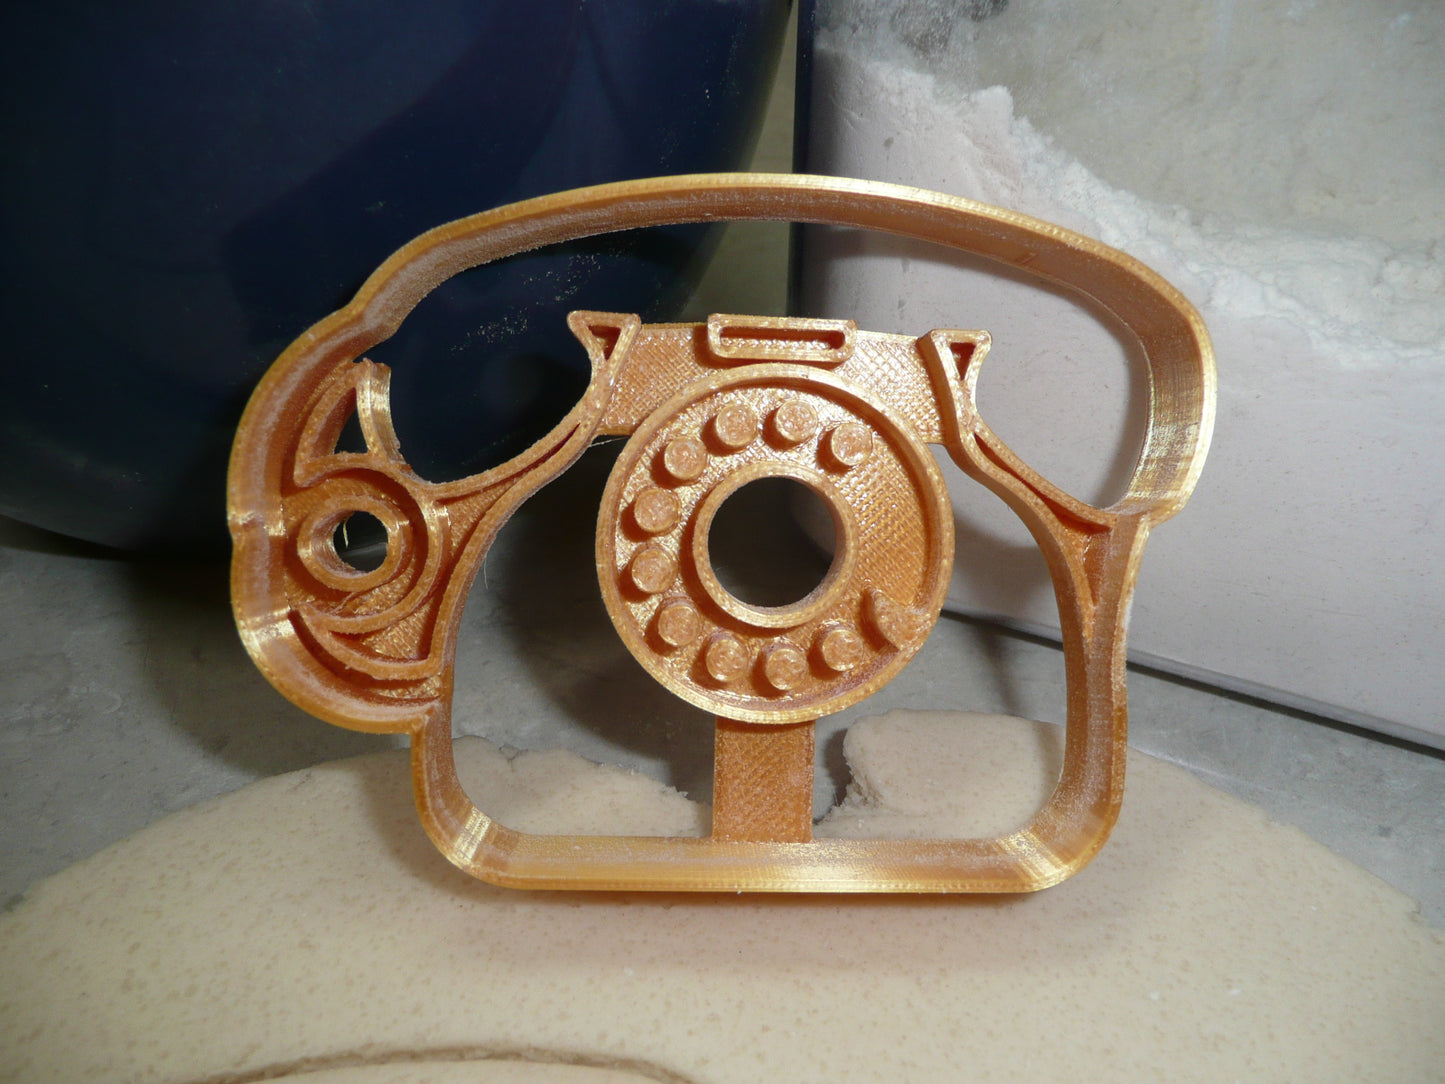 Rotary Dial Phone Vintage Style Cookie Cutter Made In USA PR5035